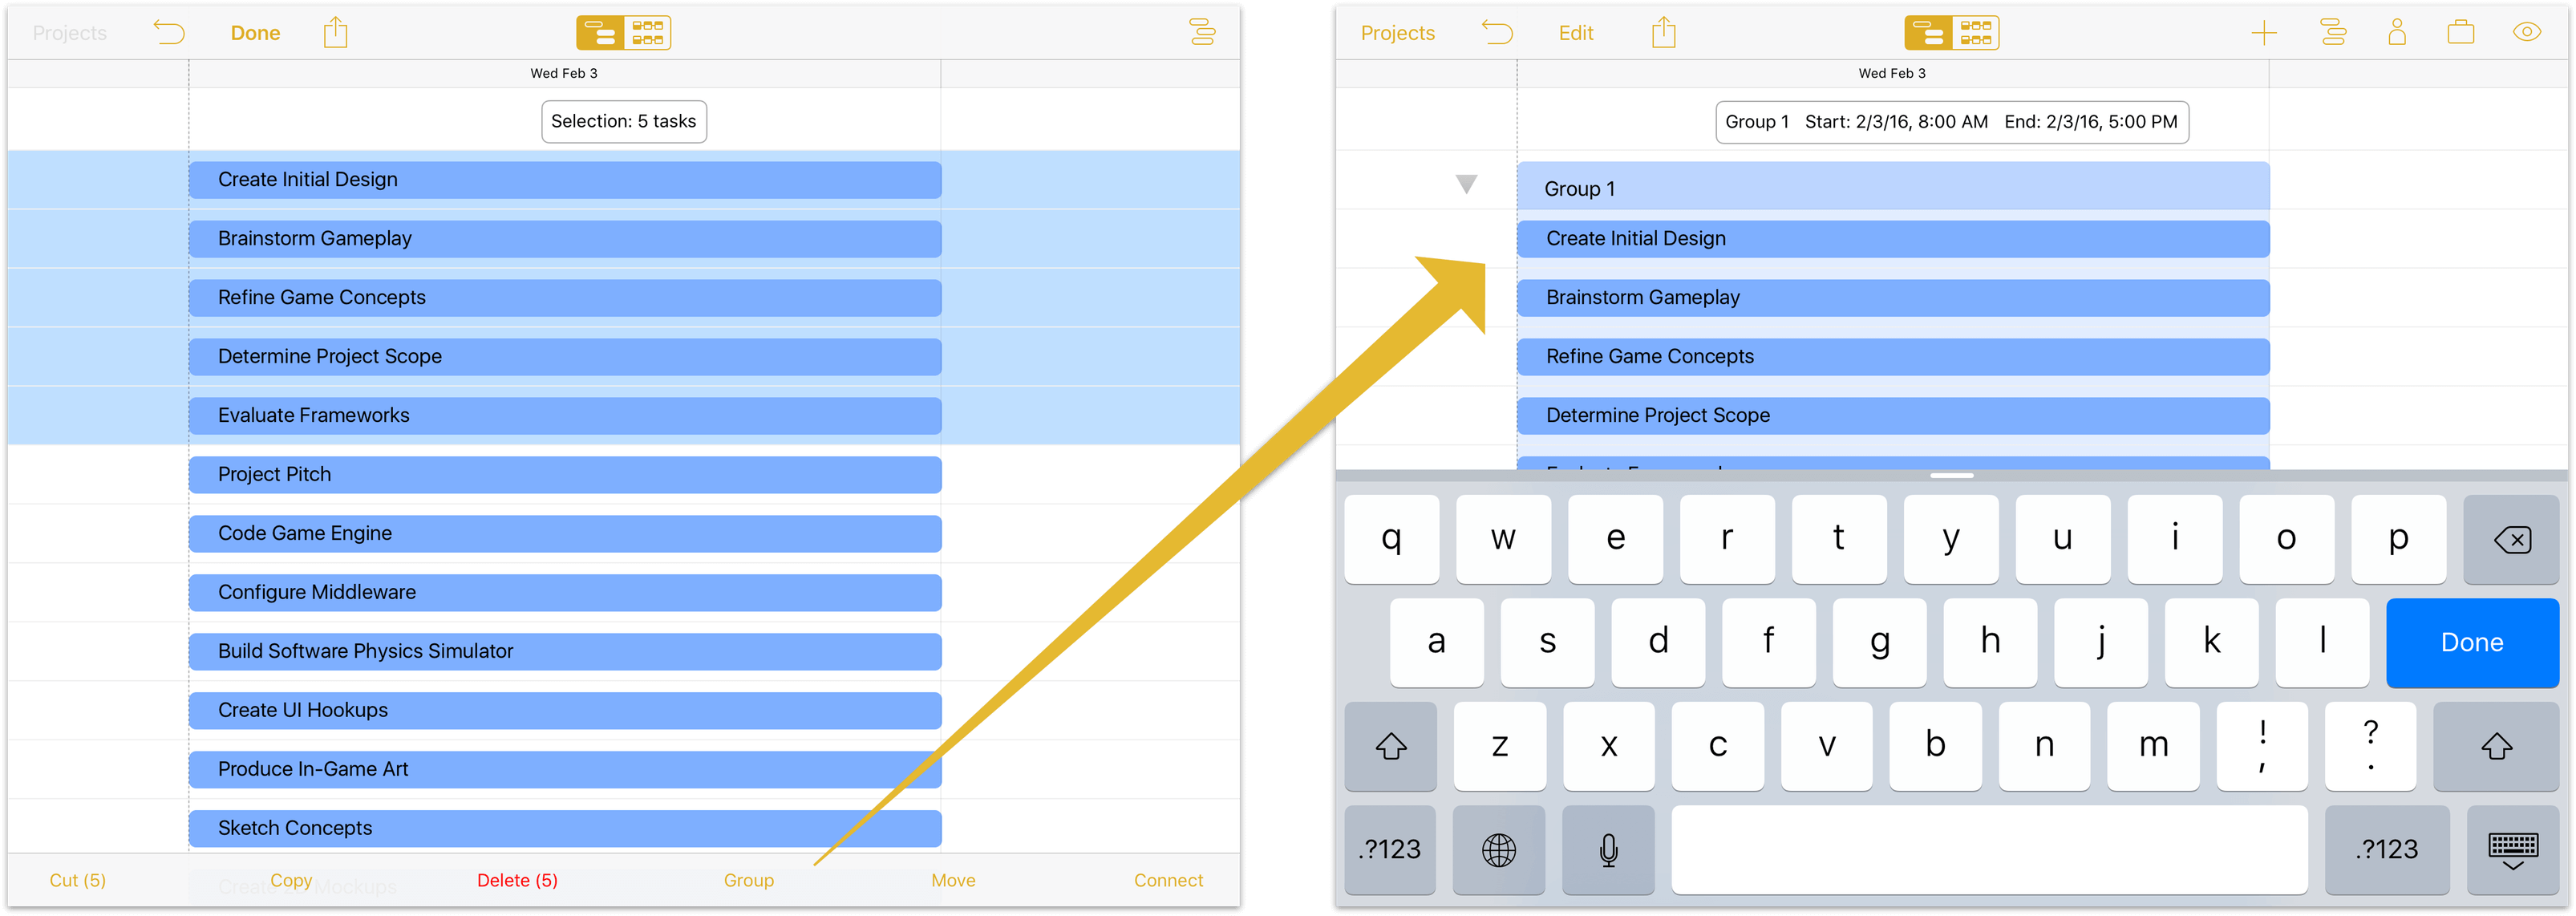 Selecting multiple tasks for grouping in Edit mode.